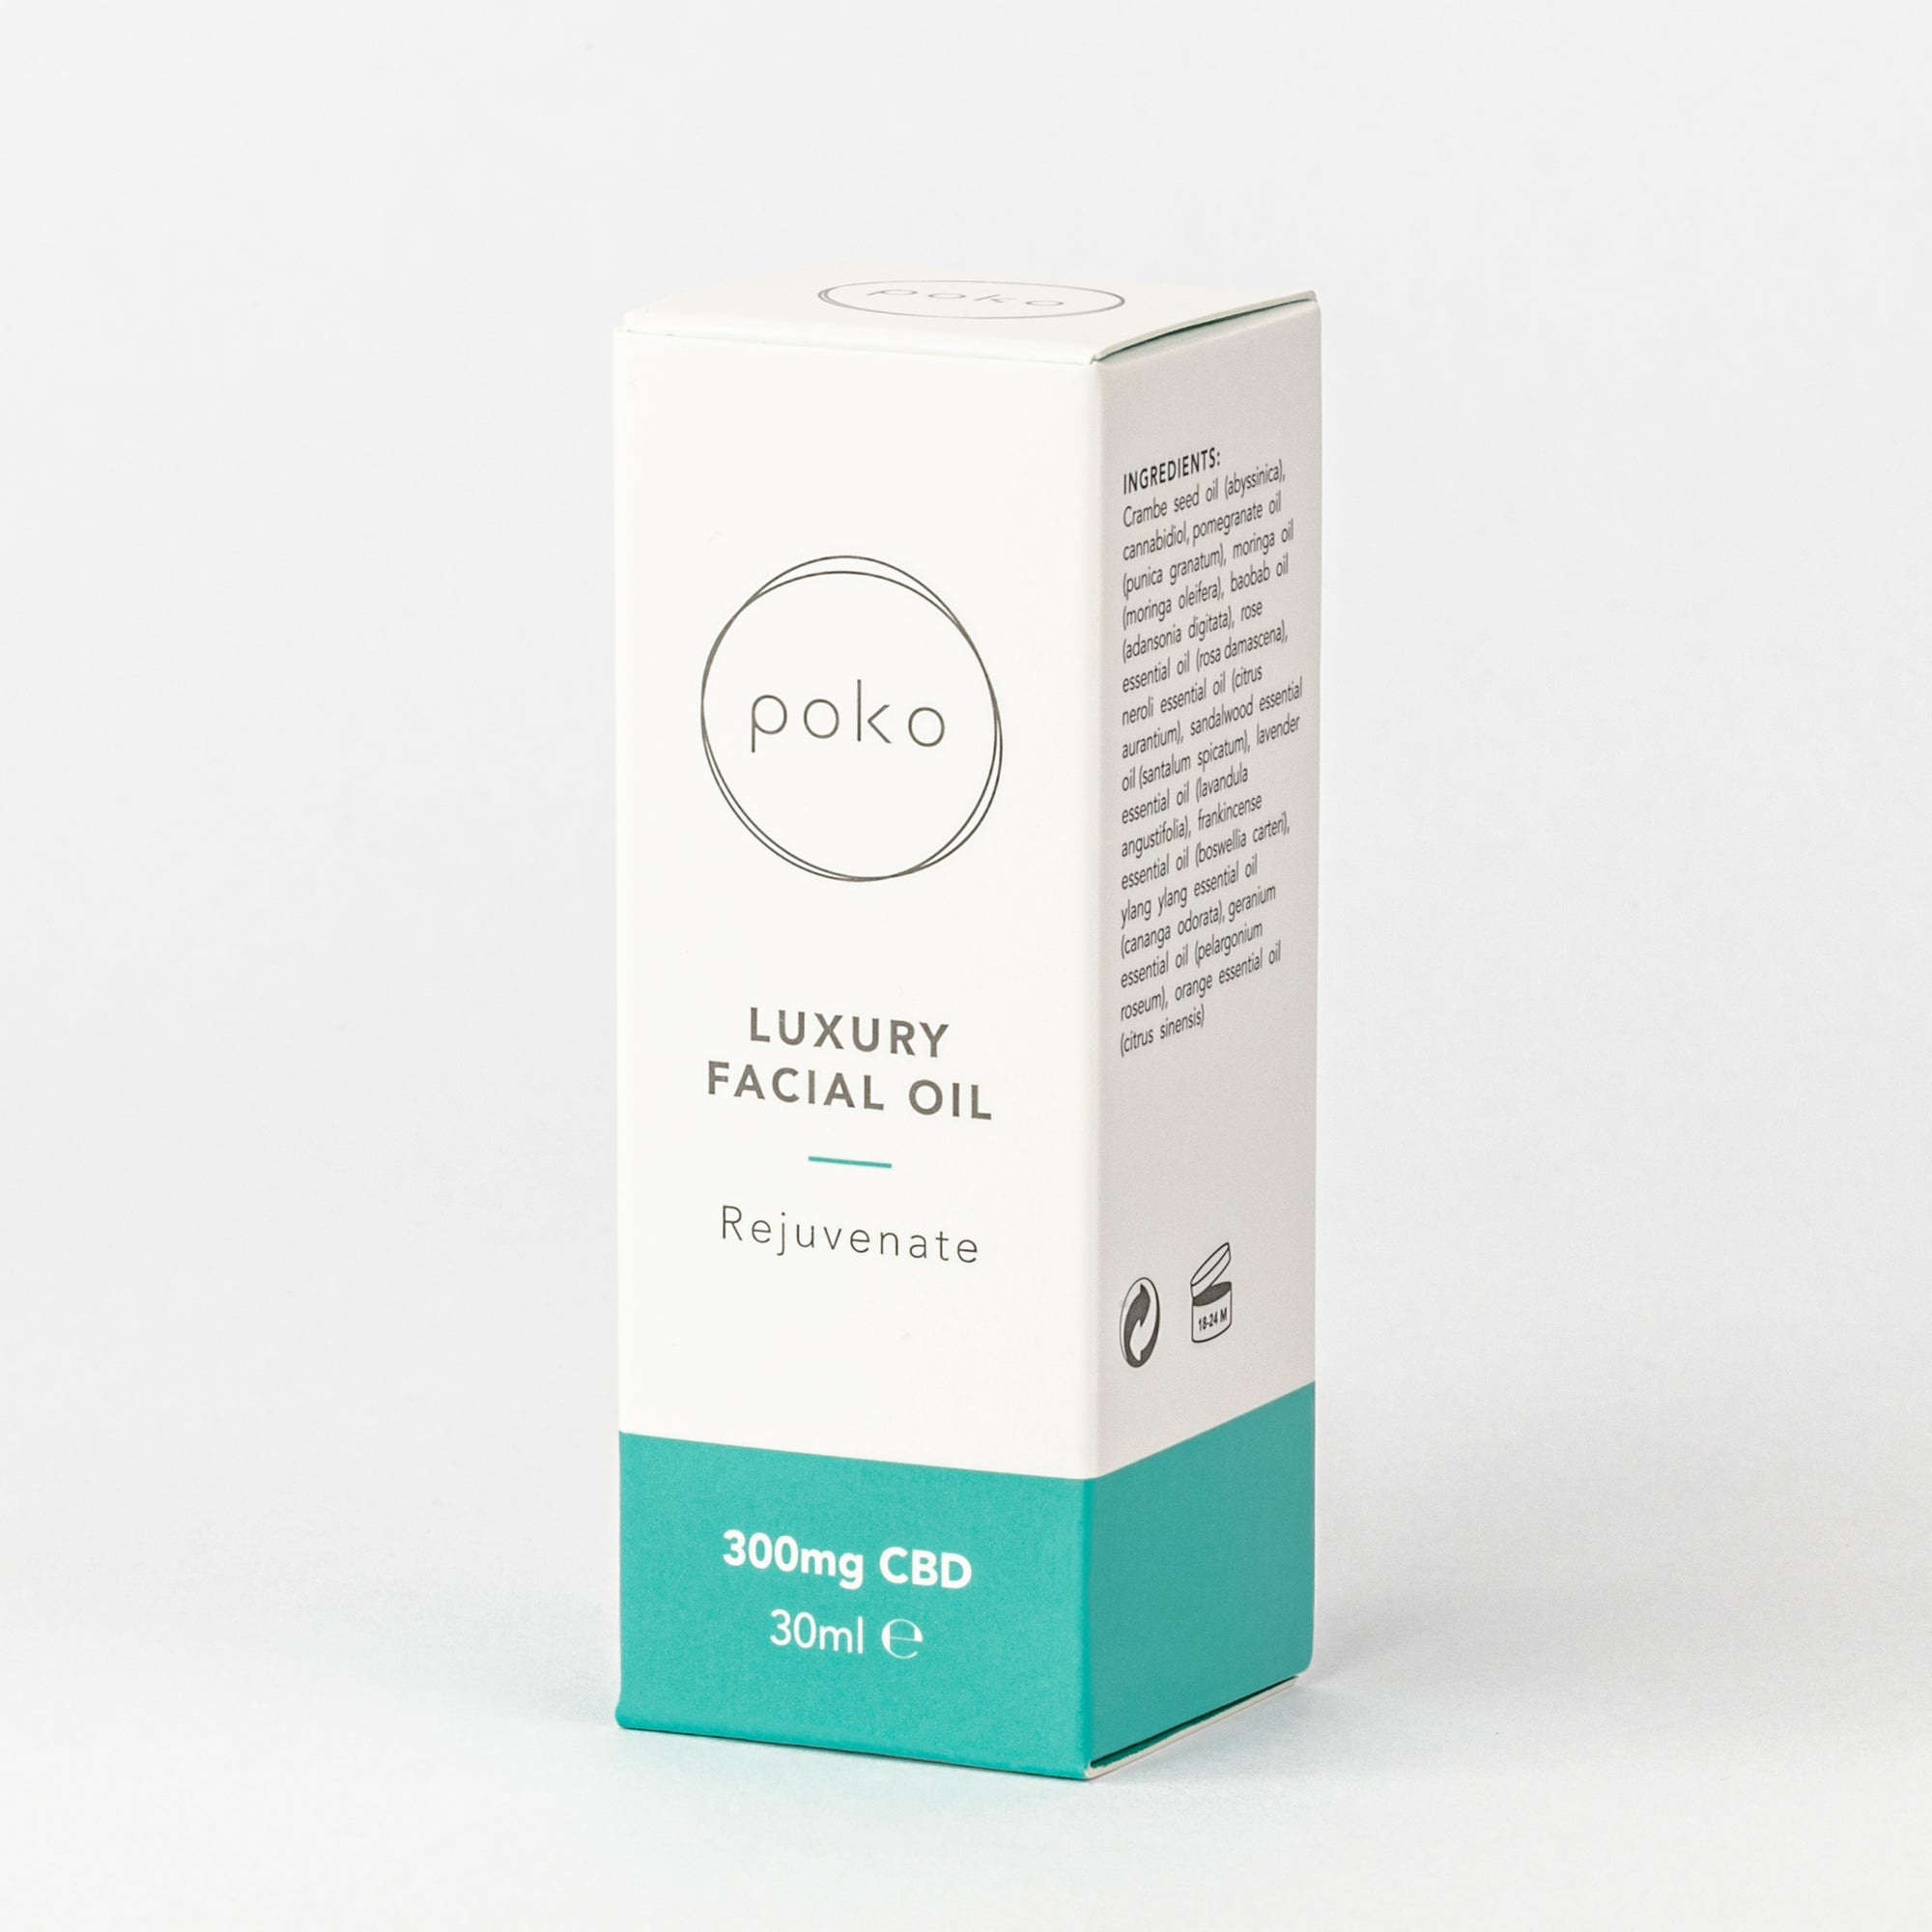 POKO Luxury Facial Oil 30ml using 13 natural oils For dryness, sun spots & uneven skin tone